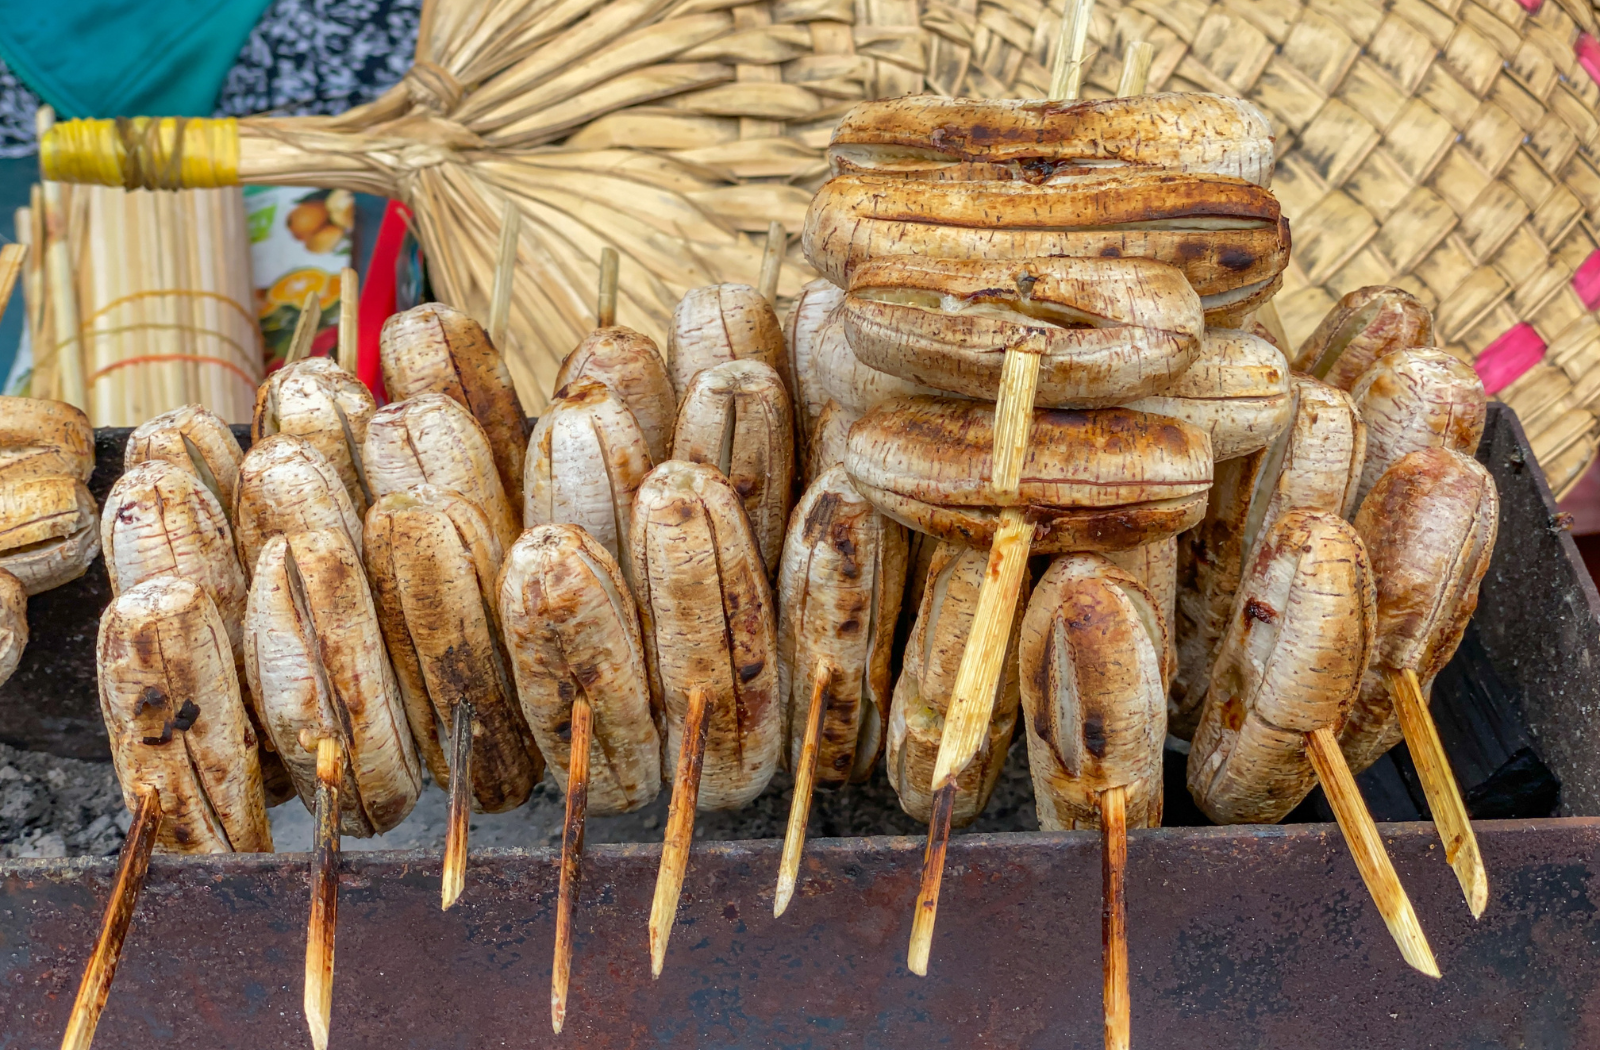 Sweet grilled banana at a Cambodian street food stall